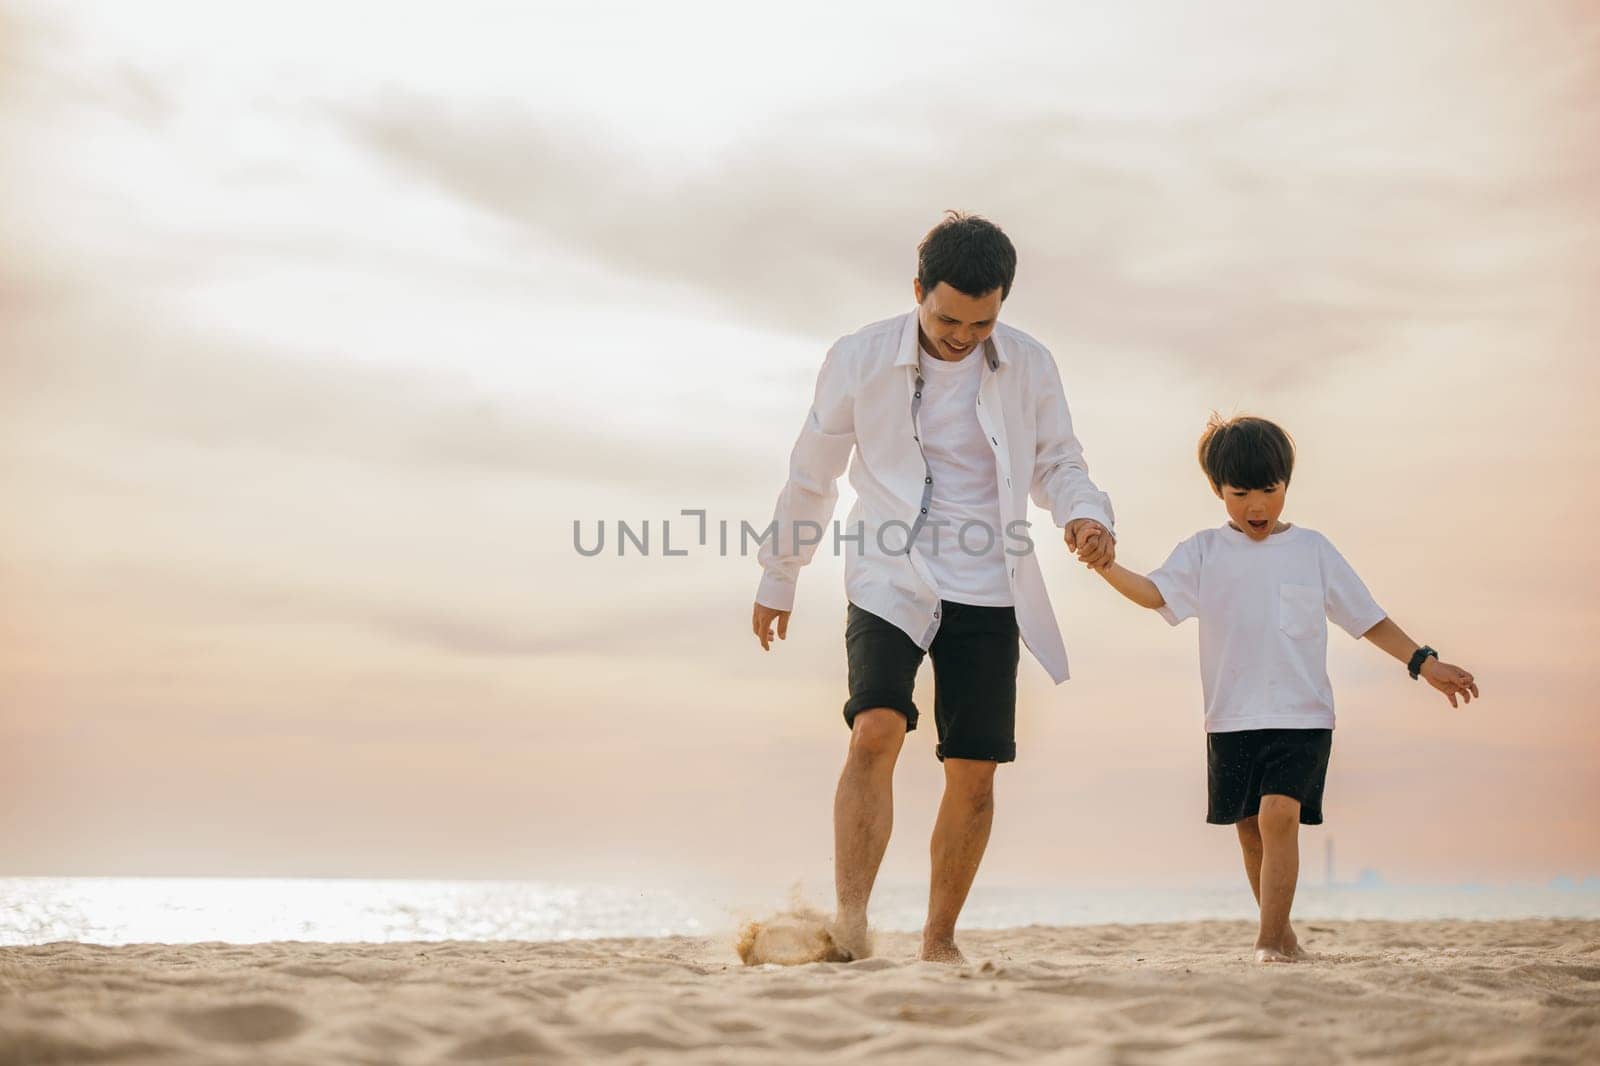 A playful scene at the beach as an Asian father runs with his son hand in hand. Laughter bonding and family togetherness captured in this joyful moment by Sorapop